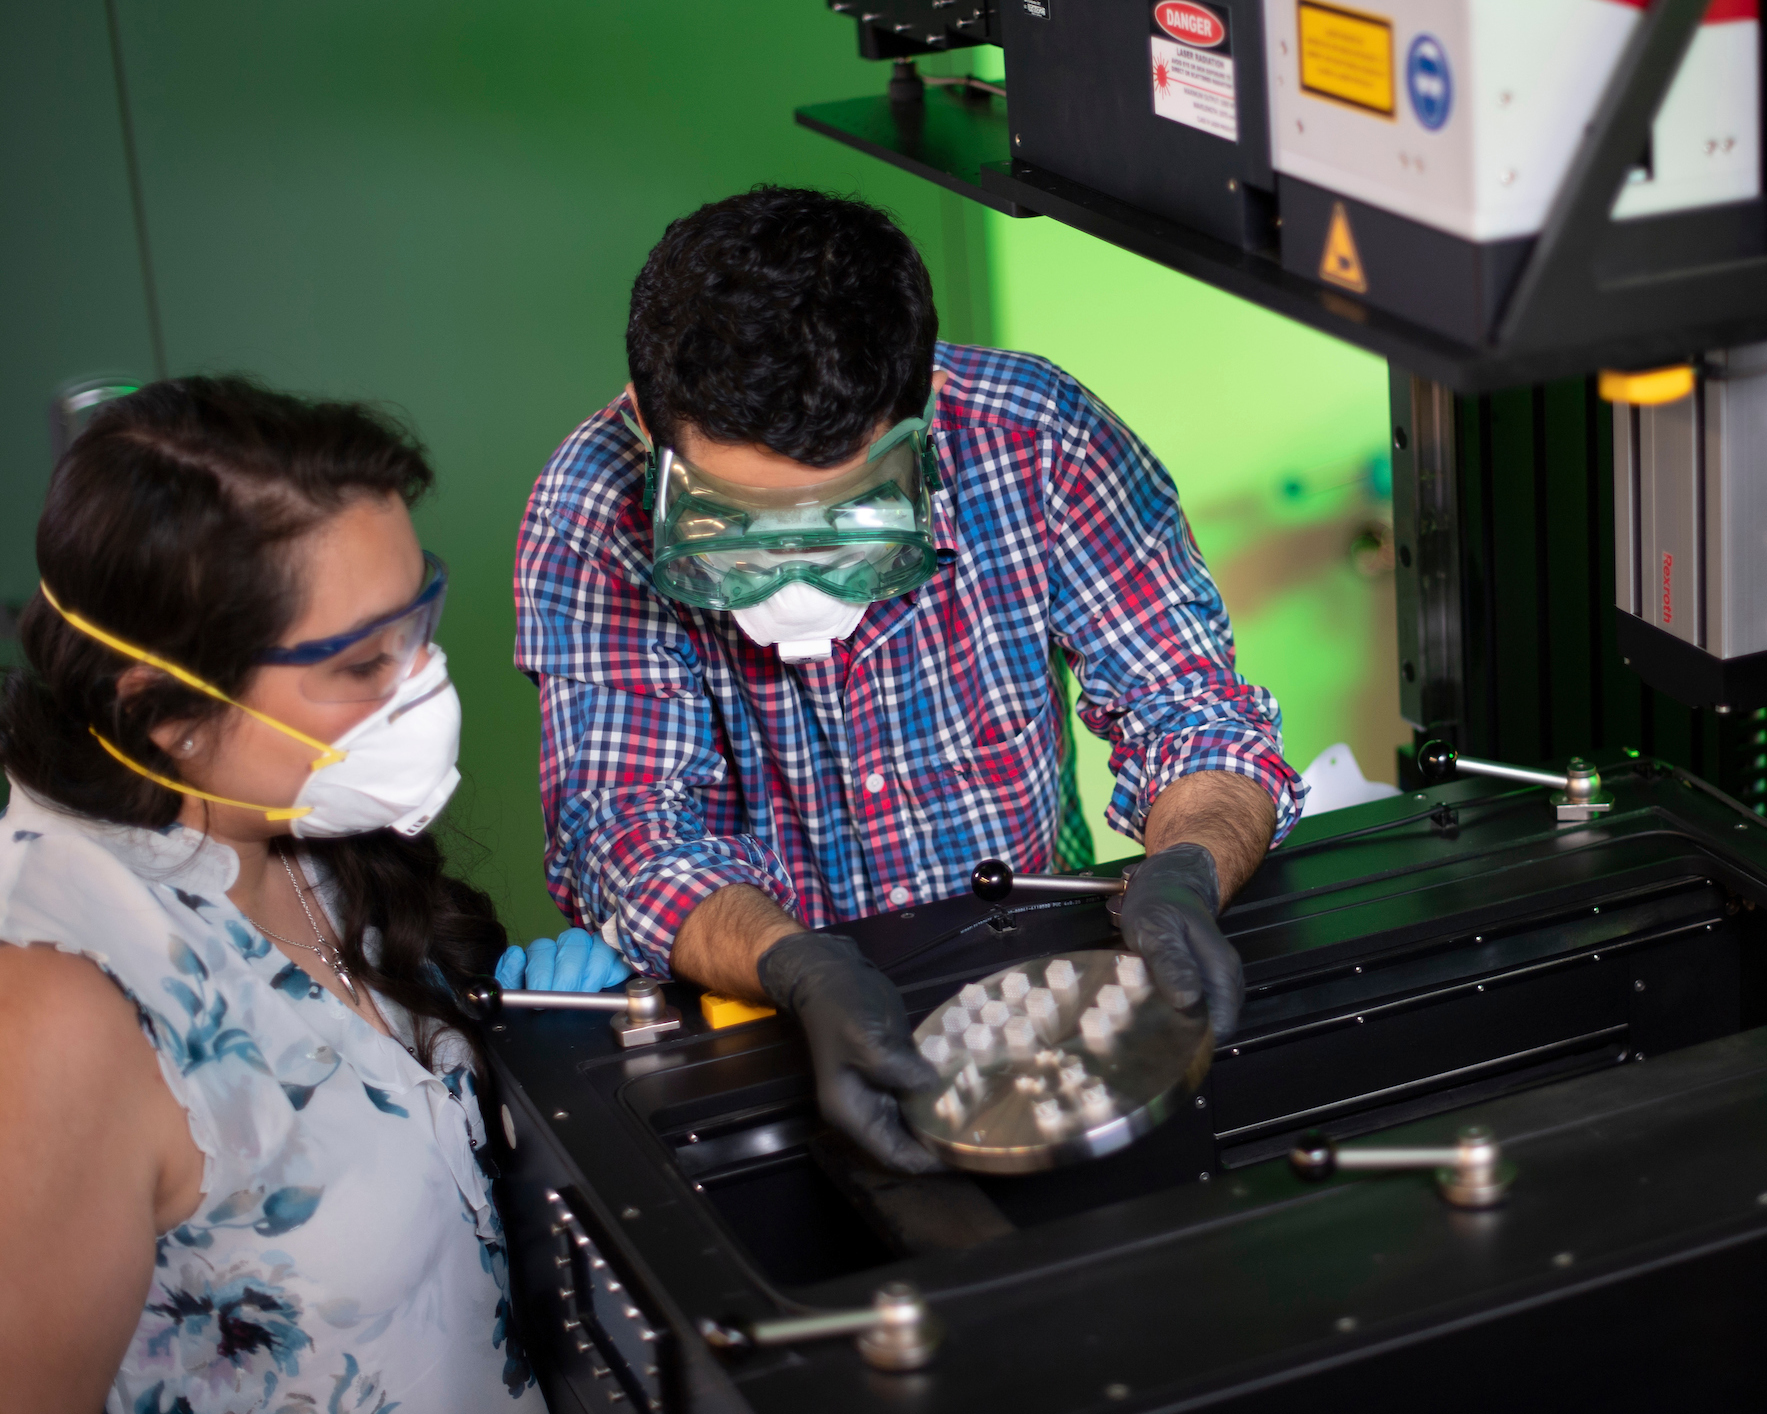 UNT’s Center for Agile and Adaptive Additive Manufacturing on way to becoming one of the most advanced research, education and training facilities in the State of Texas